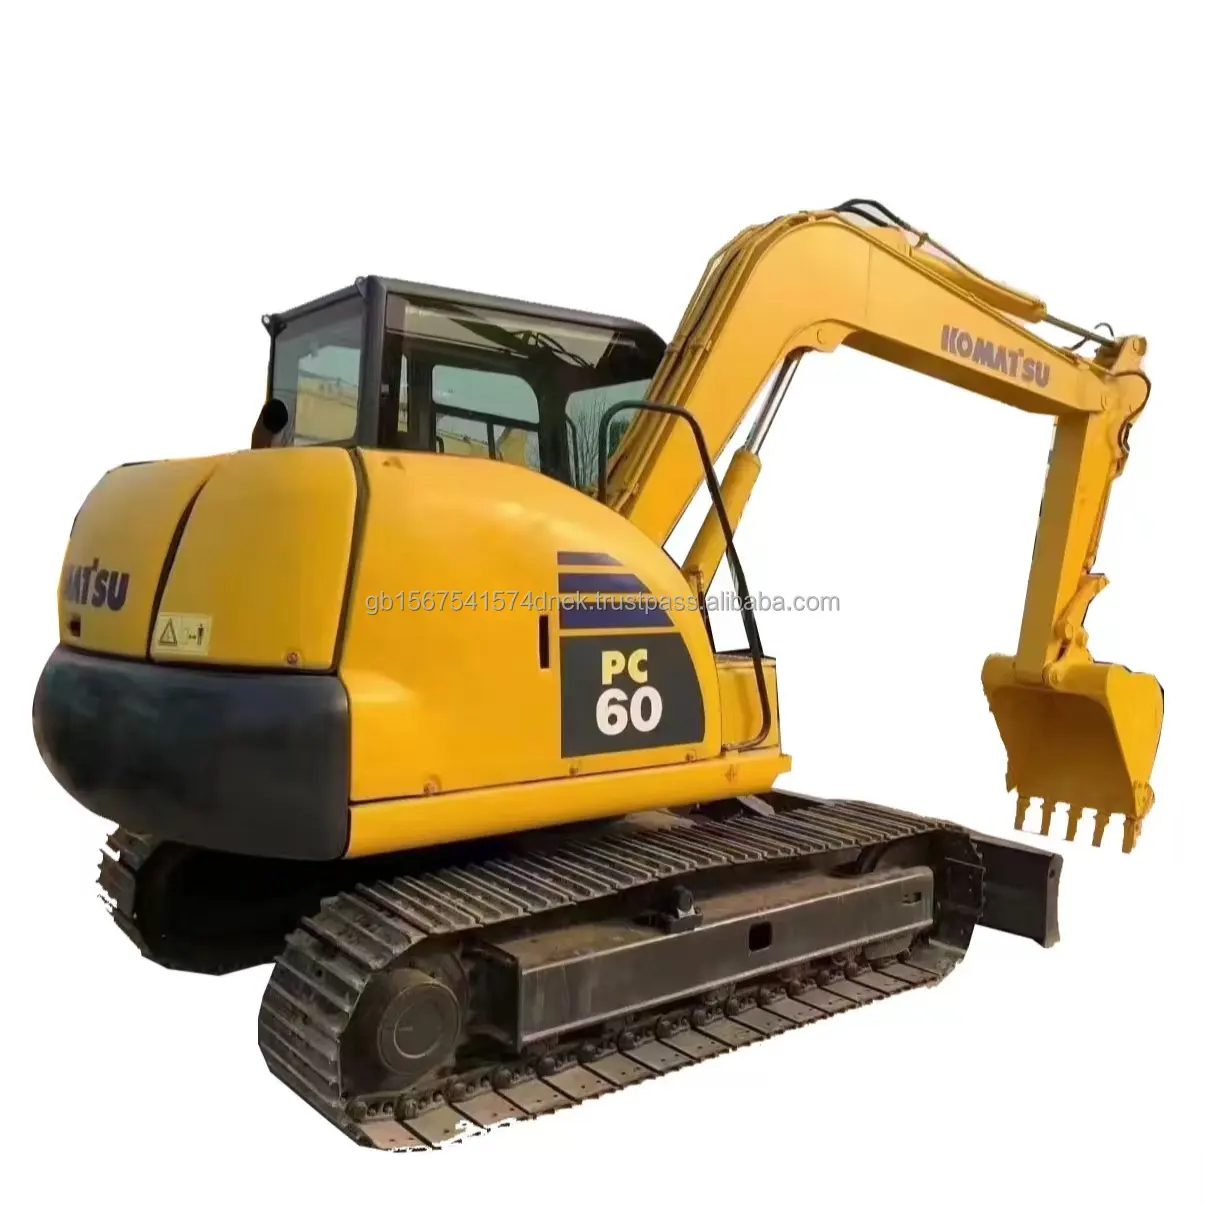 Komatsu PC60-8 Affordable Price Excellent Quality in stock Crawler Excavator in Good Condition hot sale100% Ready Used Excavator